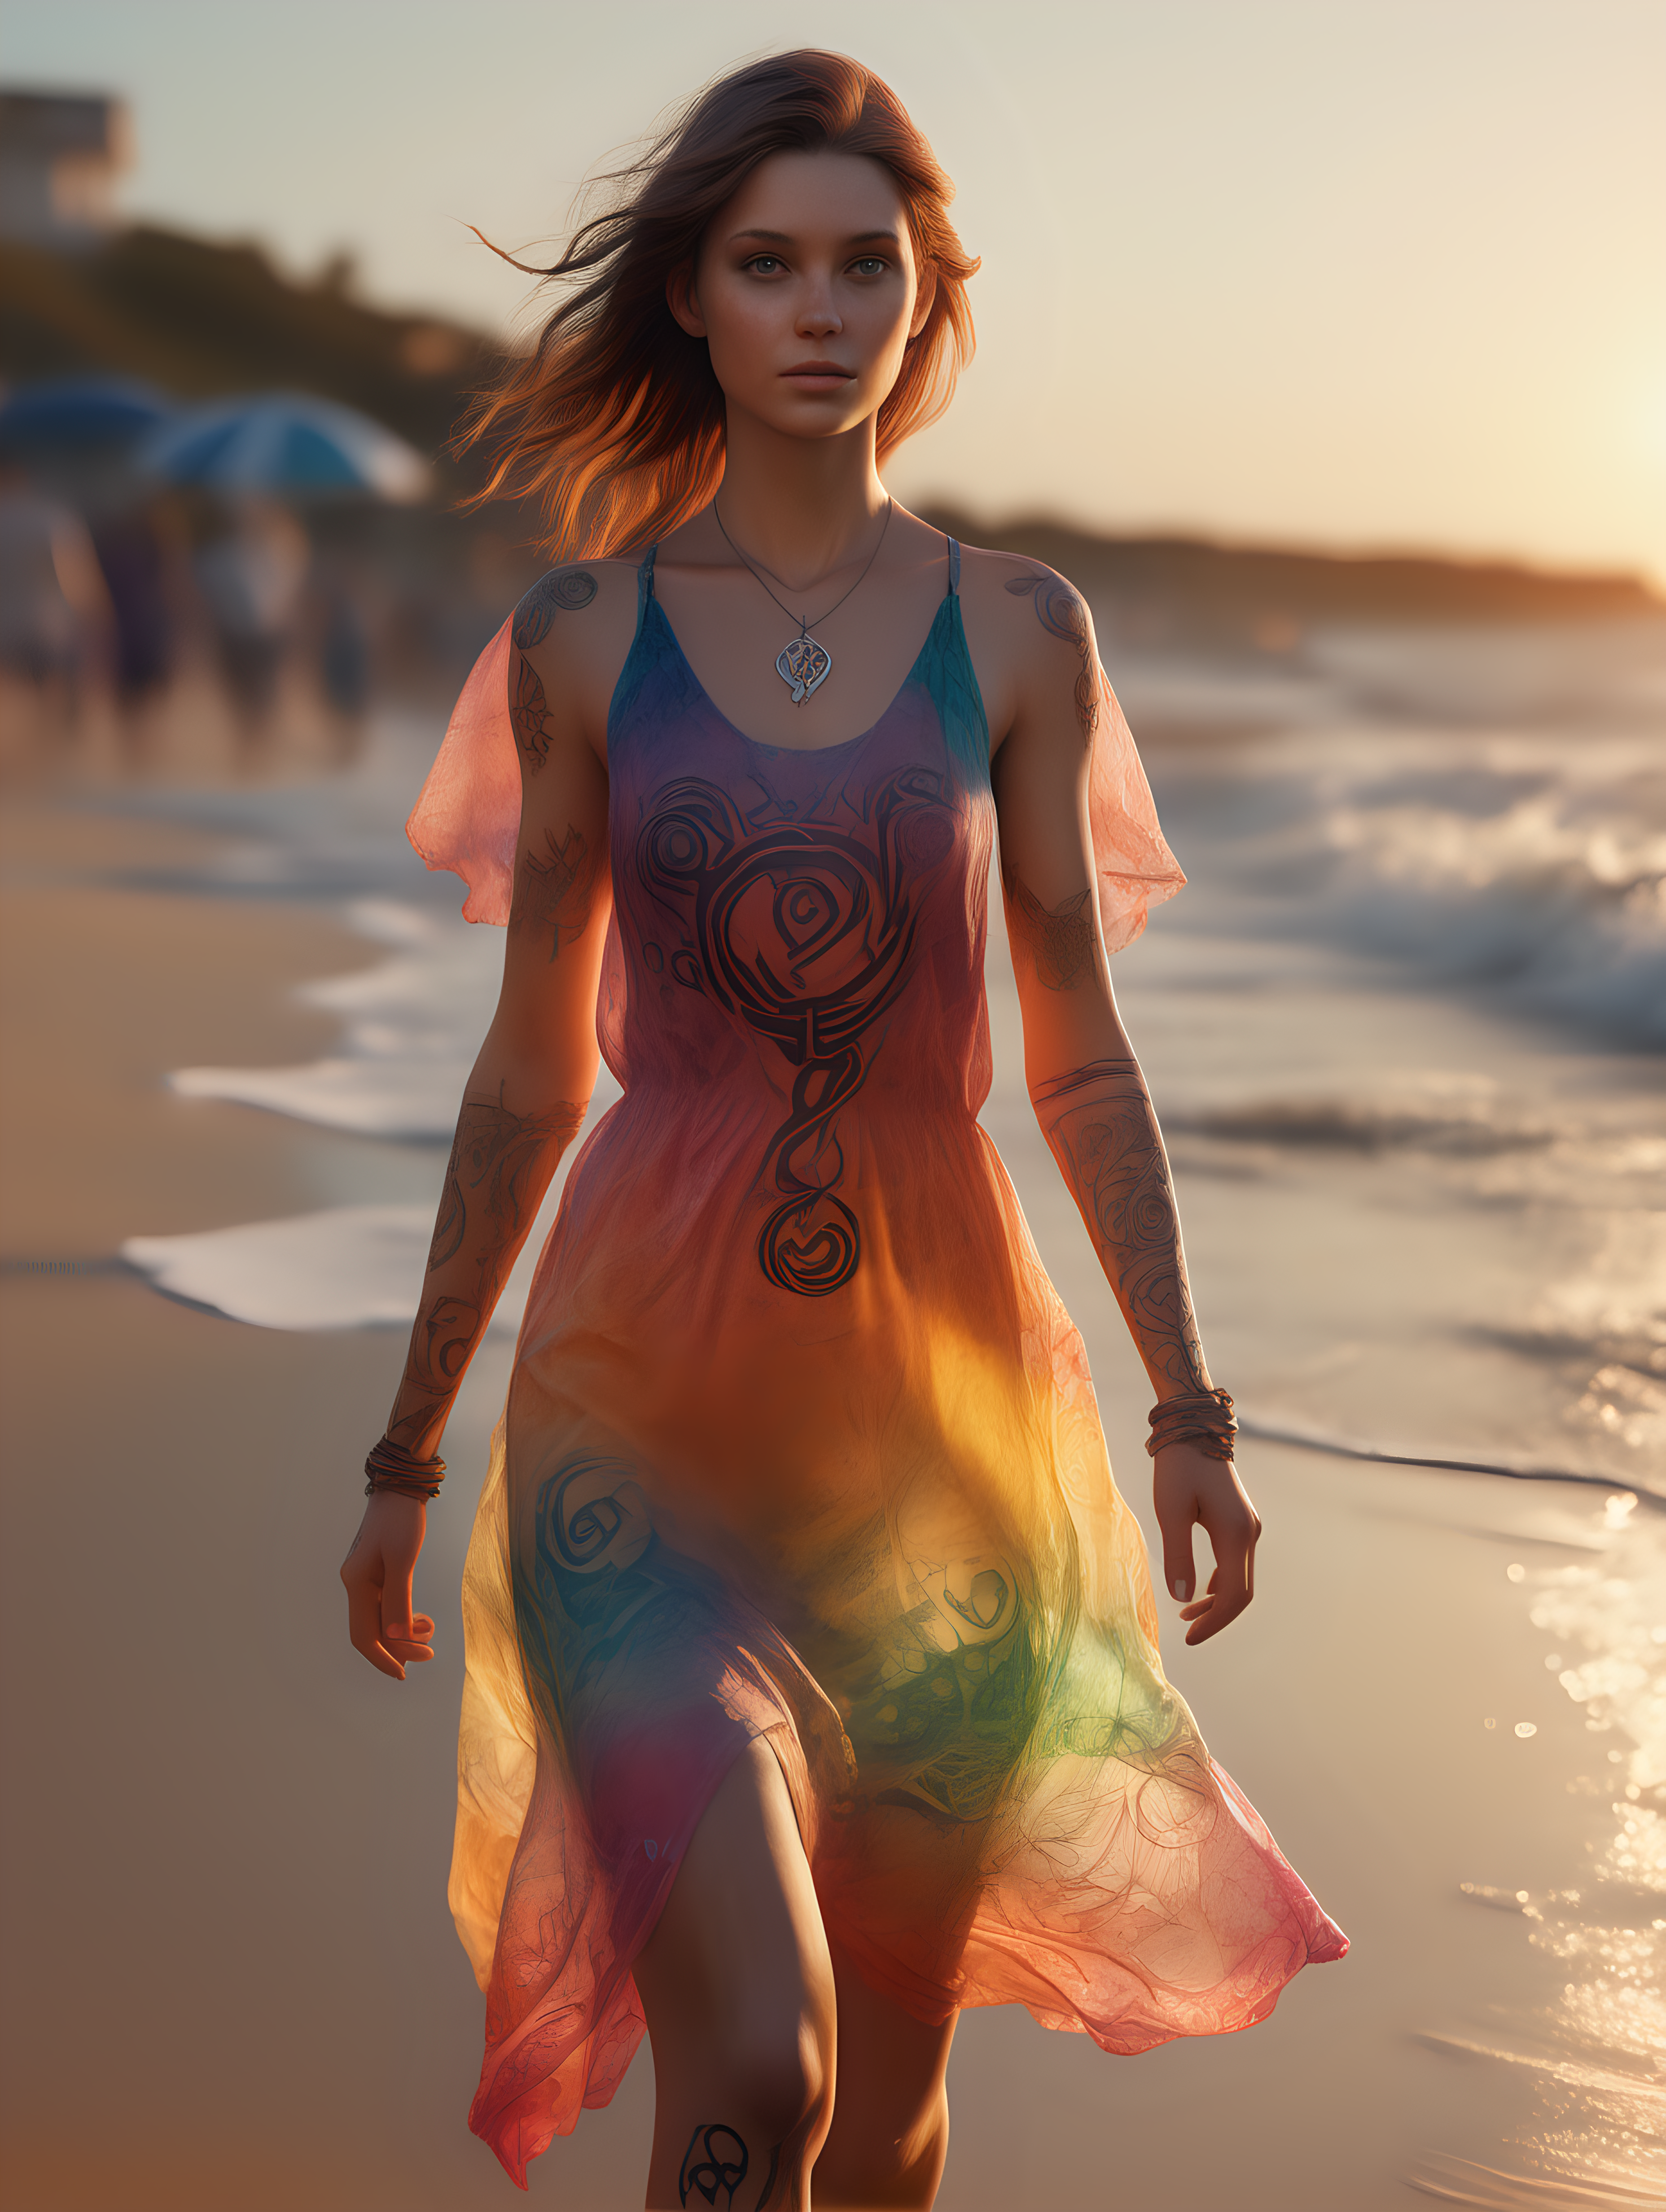 ultra-realistic high resolution and highly detailed photo of a female human, she has draconic symbols carved into her arms and body, wearing a colourful transparent summer dress, walking in the sunset on a beach facing the camera